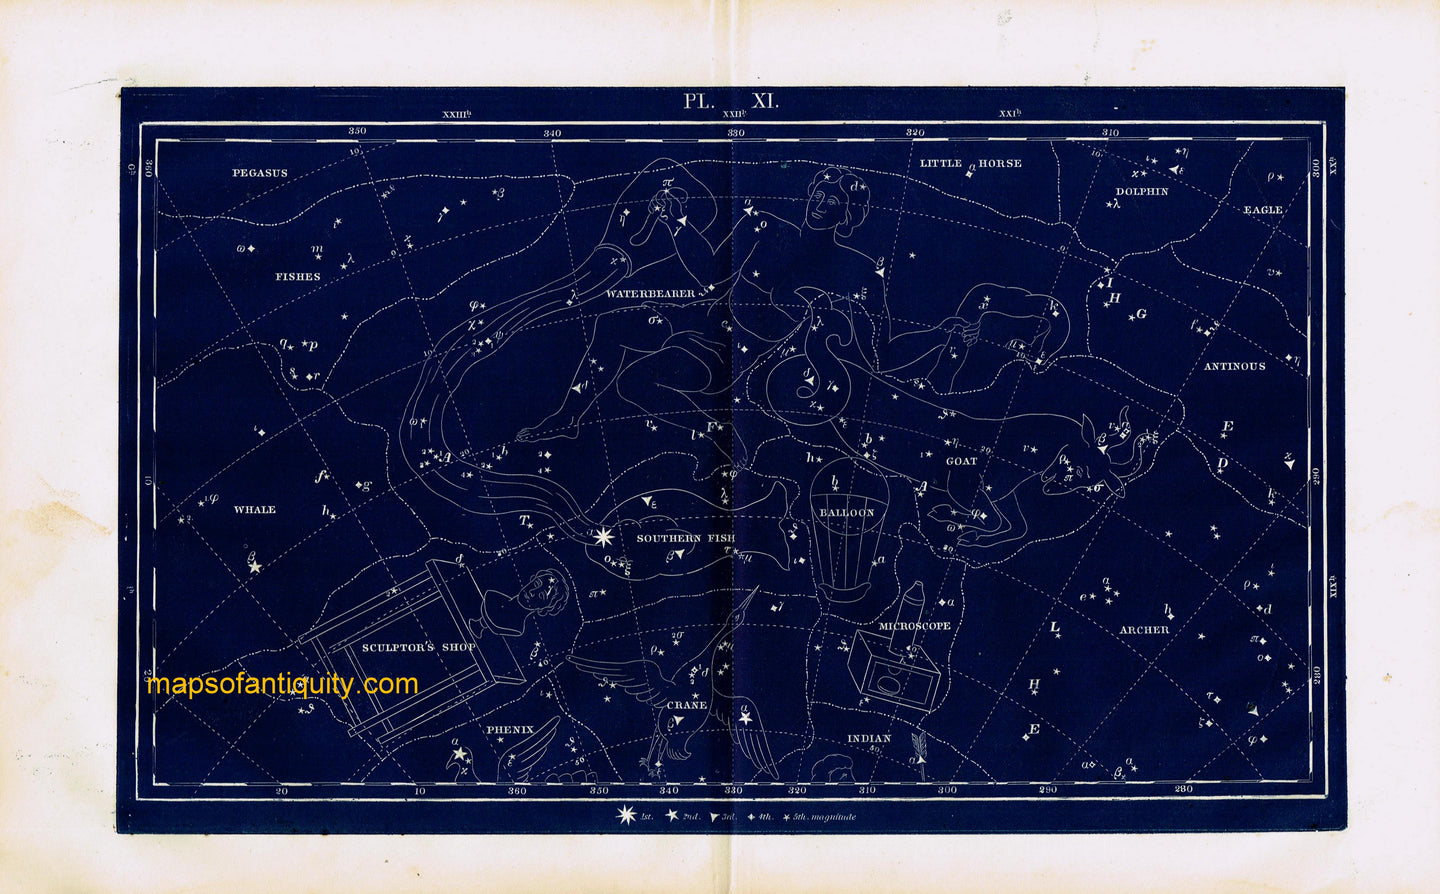 Antique-Printed-Color-Celestial-Map-Plate-XI-with-the-Waterbearer-and-the-Goat-Constellations-**********-Celestial--1846-Butler-Maps-Of-Antiquity